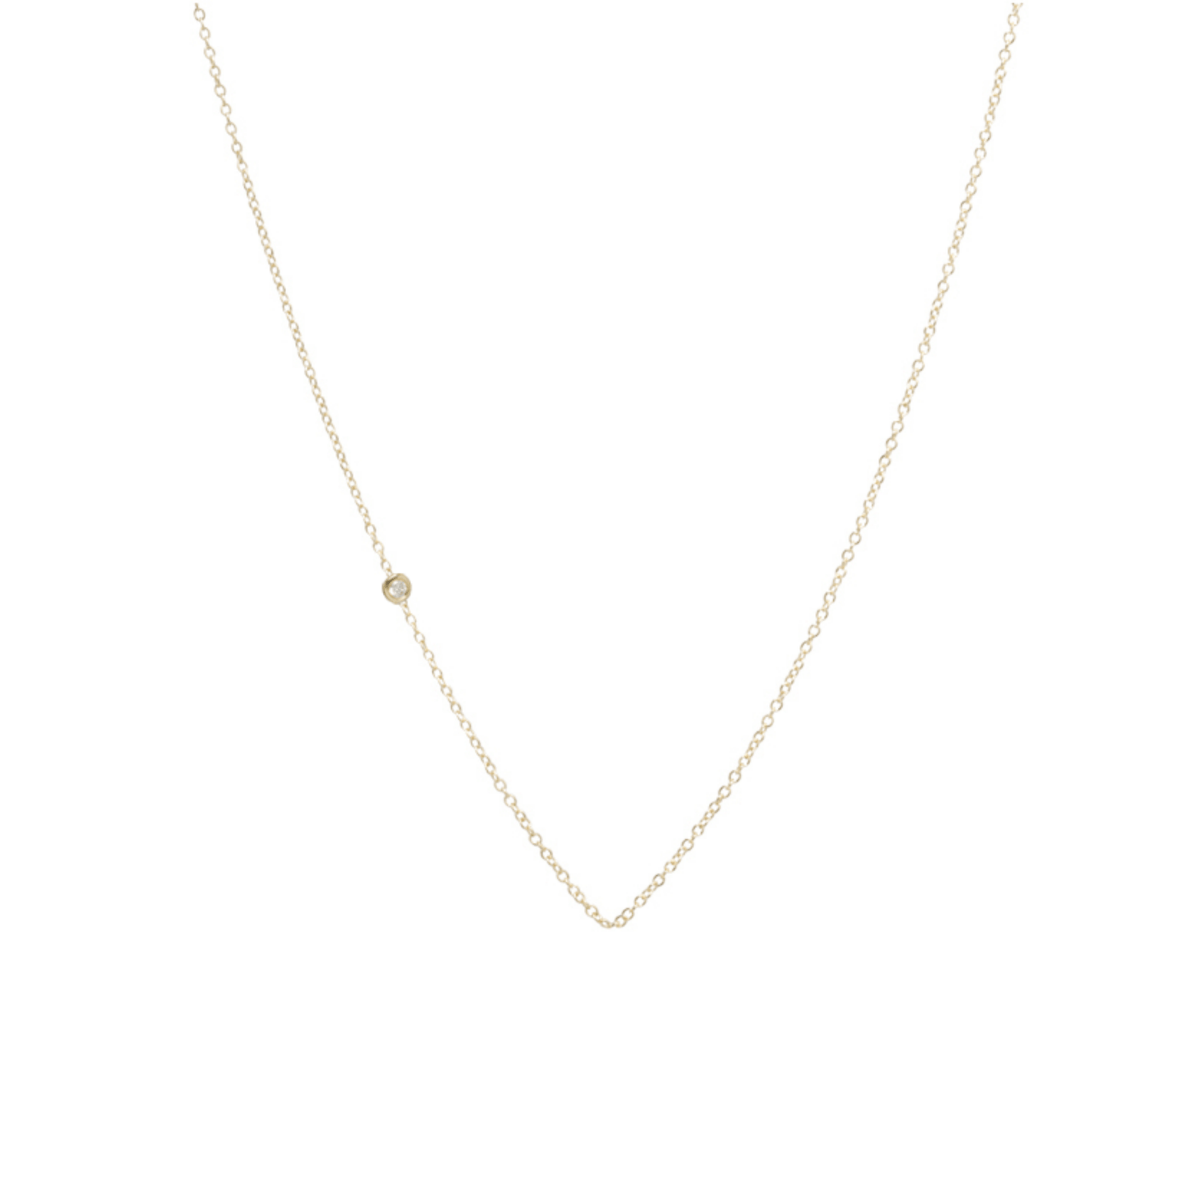 14K Yellow Gold Floating Diamond Necklace